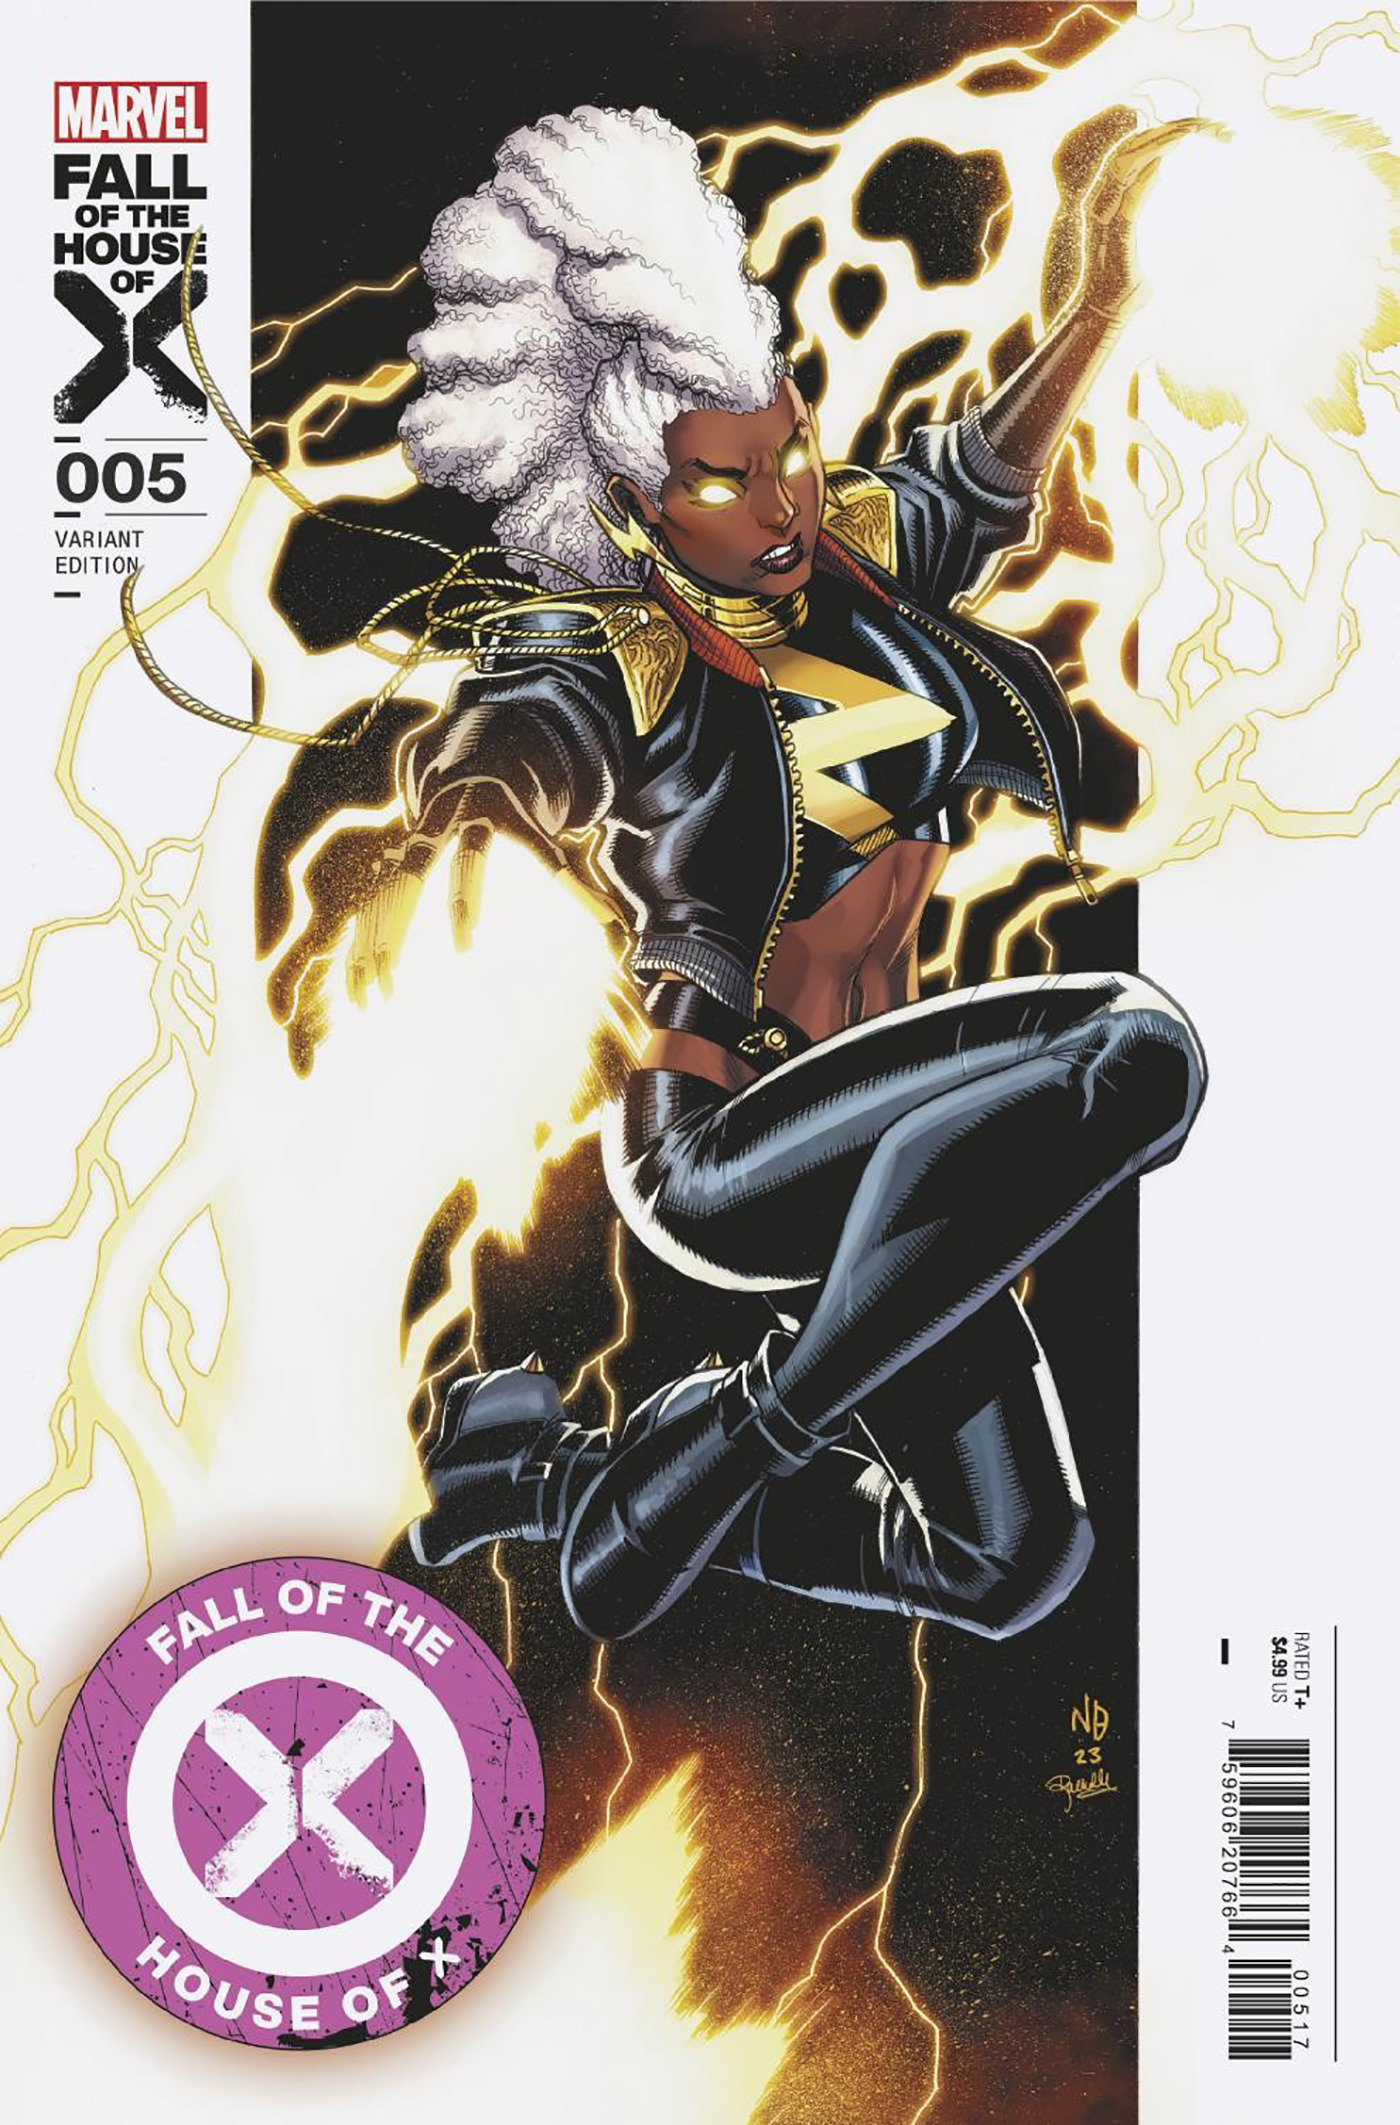 Fall of the House of X #5 1 for 25 Incentive Nick Bradshaw Variant (Fall of the House of X)